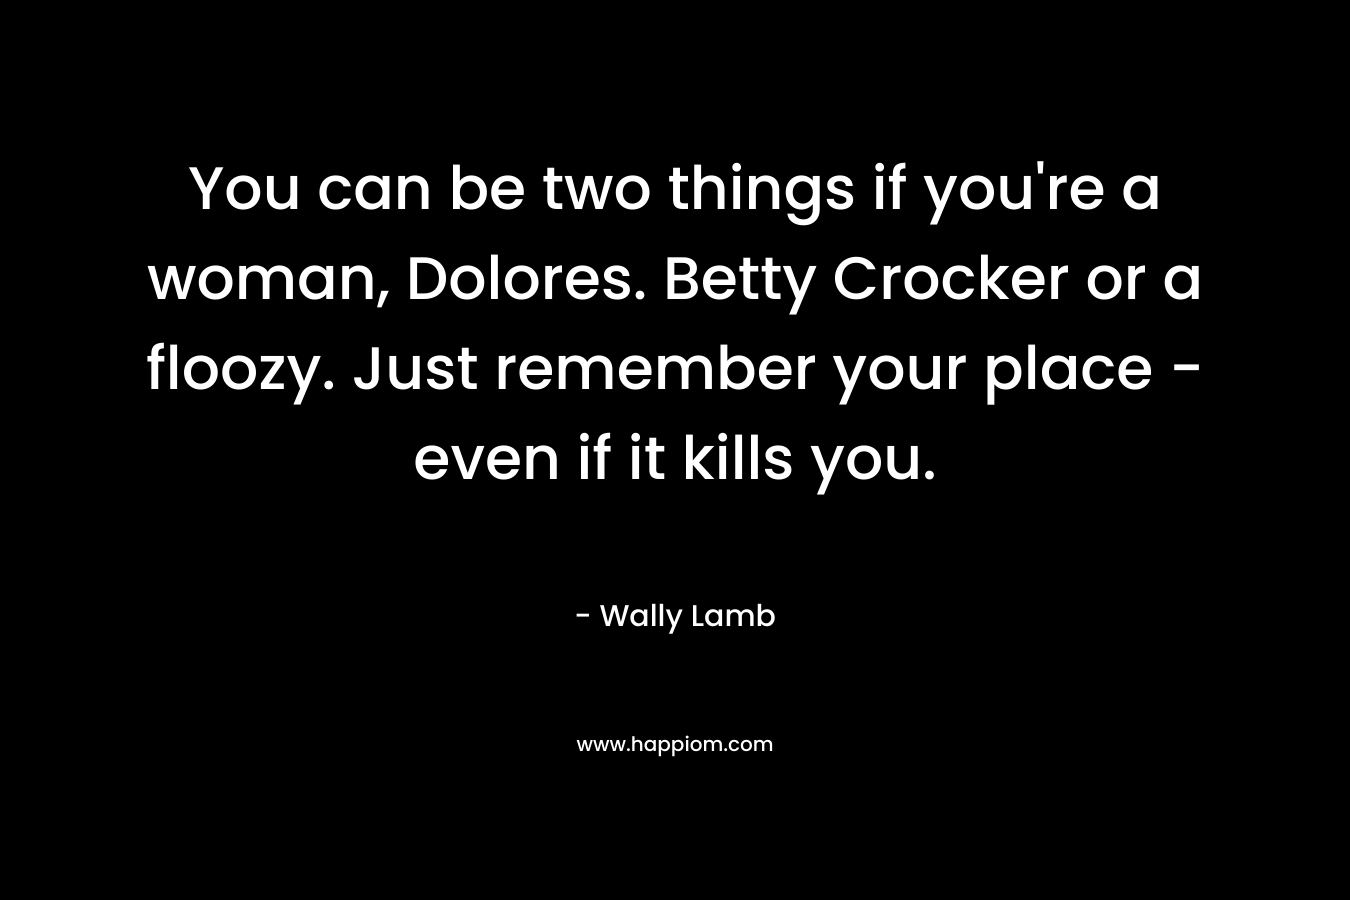 You can be two things if you’re a woman, Dolores. Betty Crocker or a floozy. Just remember your place – even if it kills you. – Wally Lamb